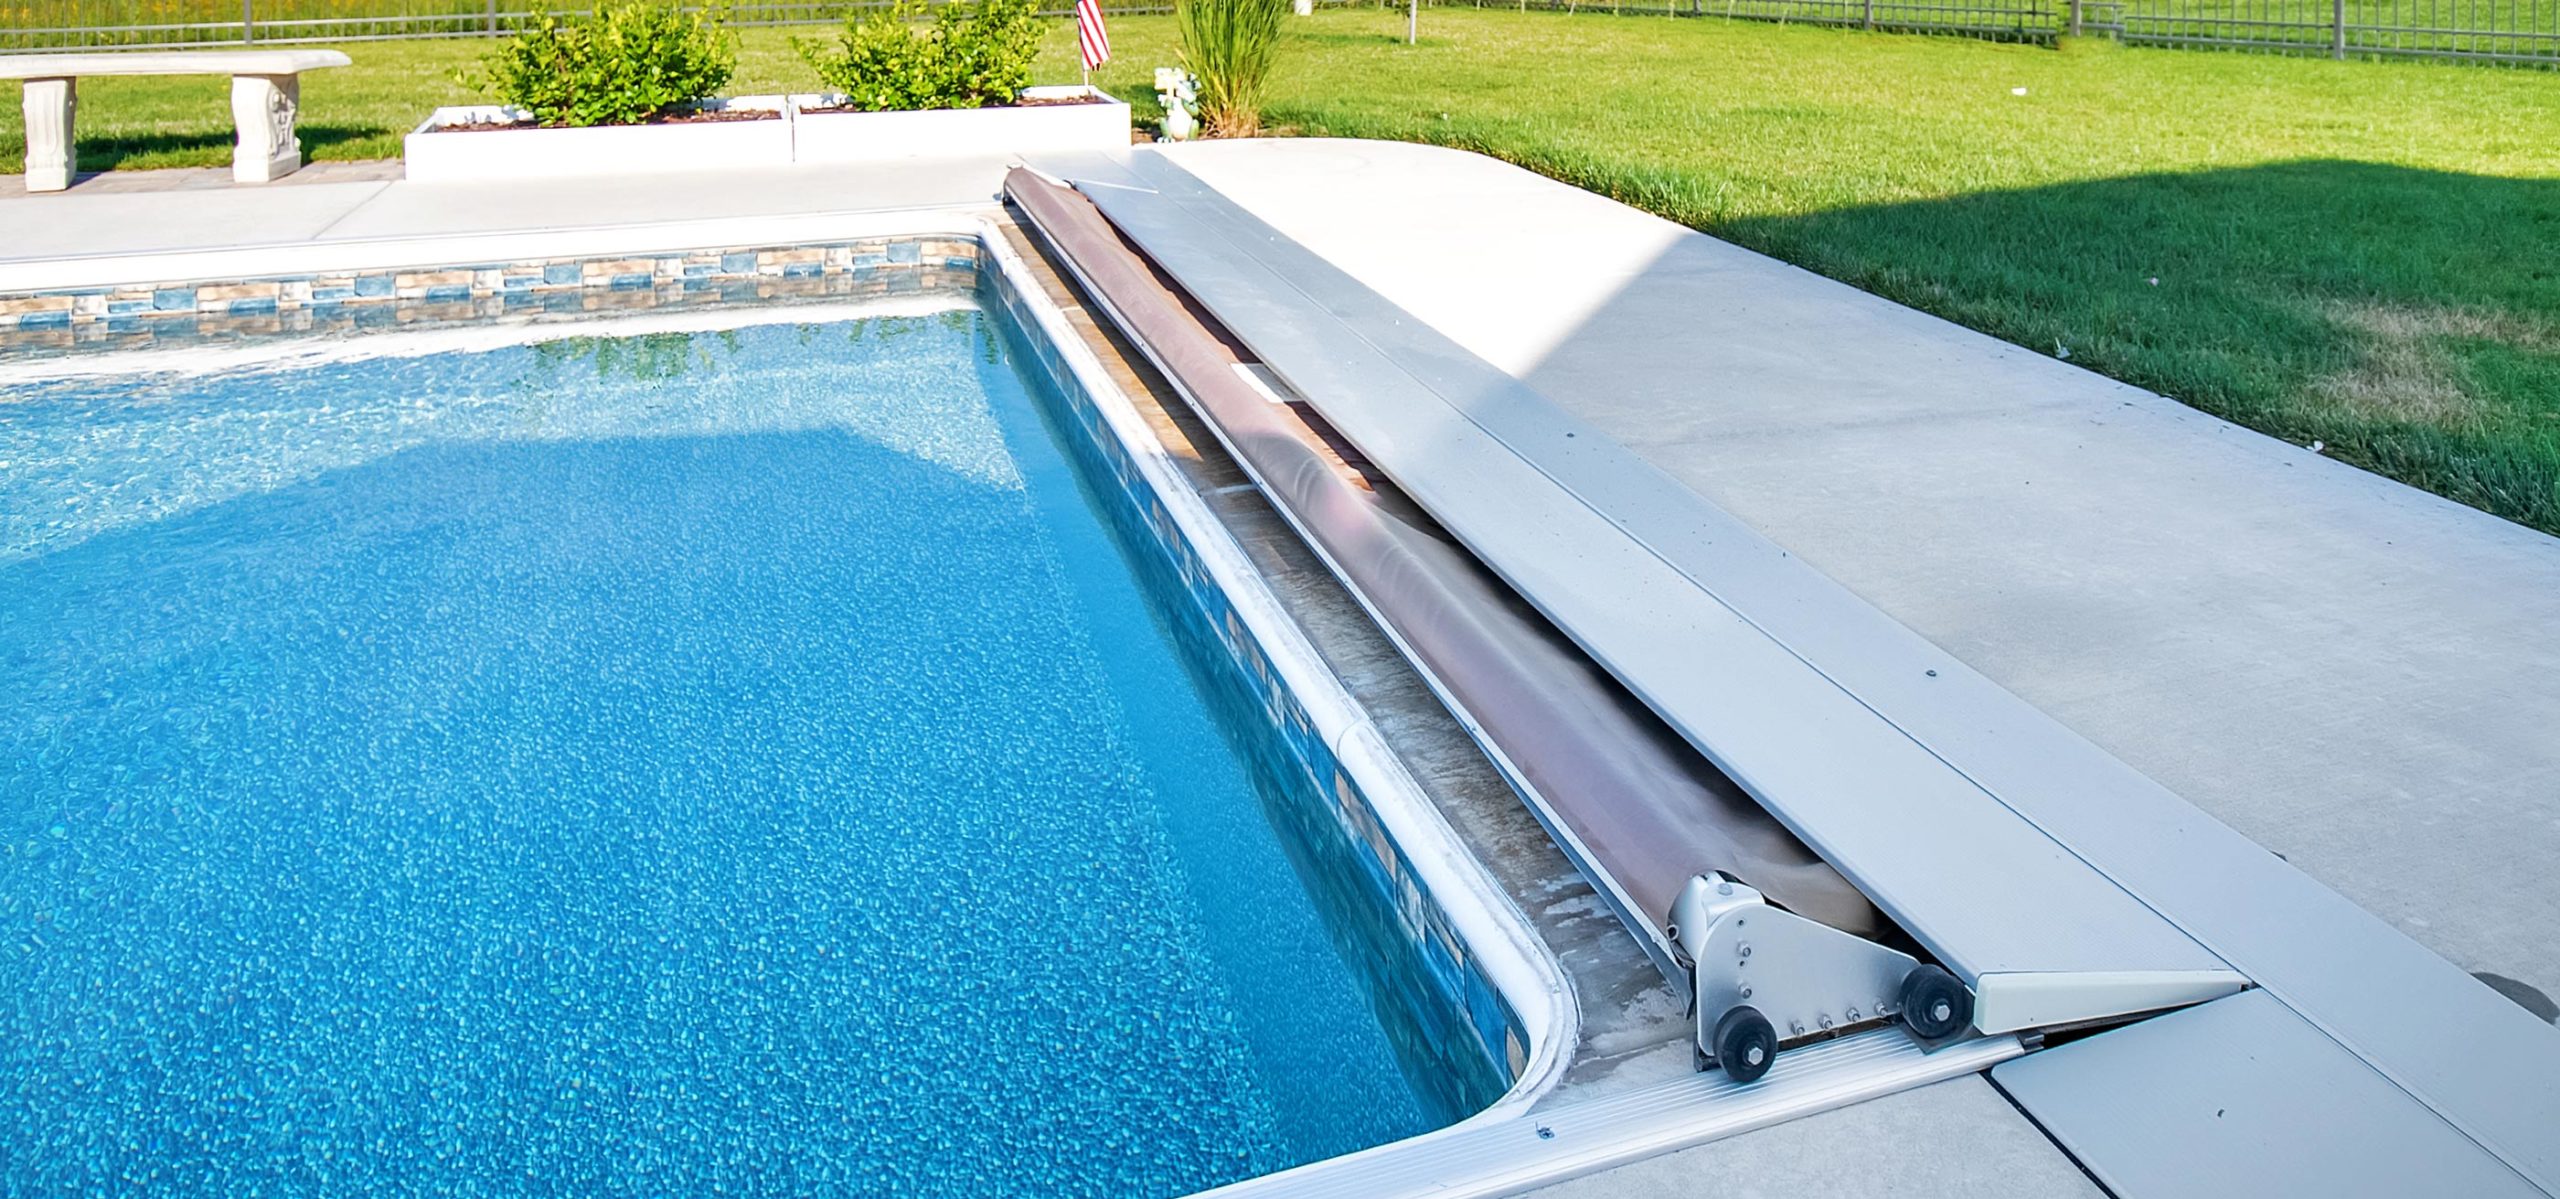 Best solar pool cover brands of 2021, according to experts